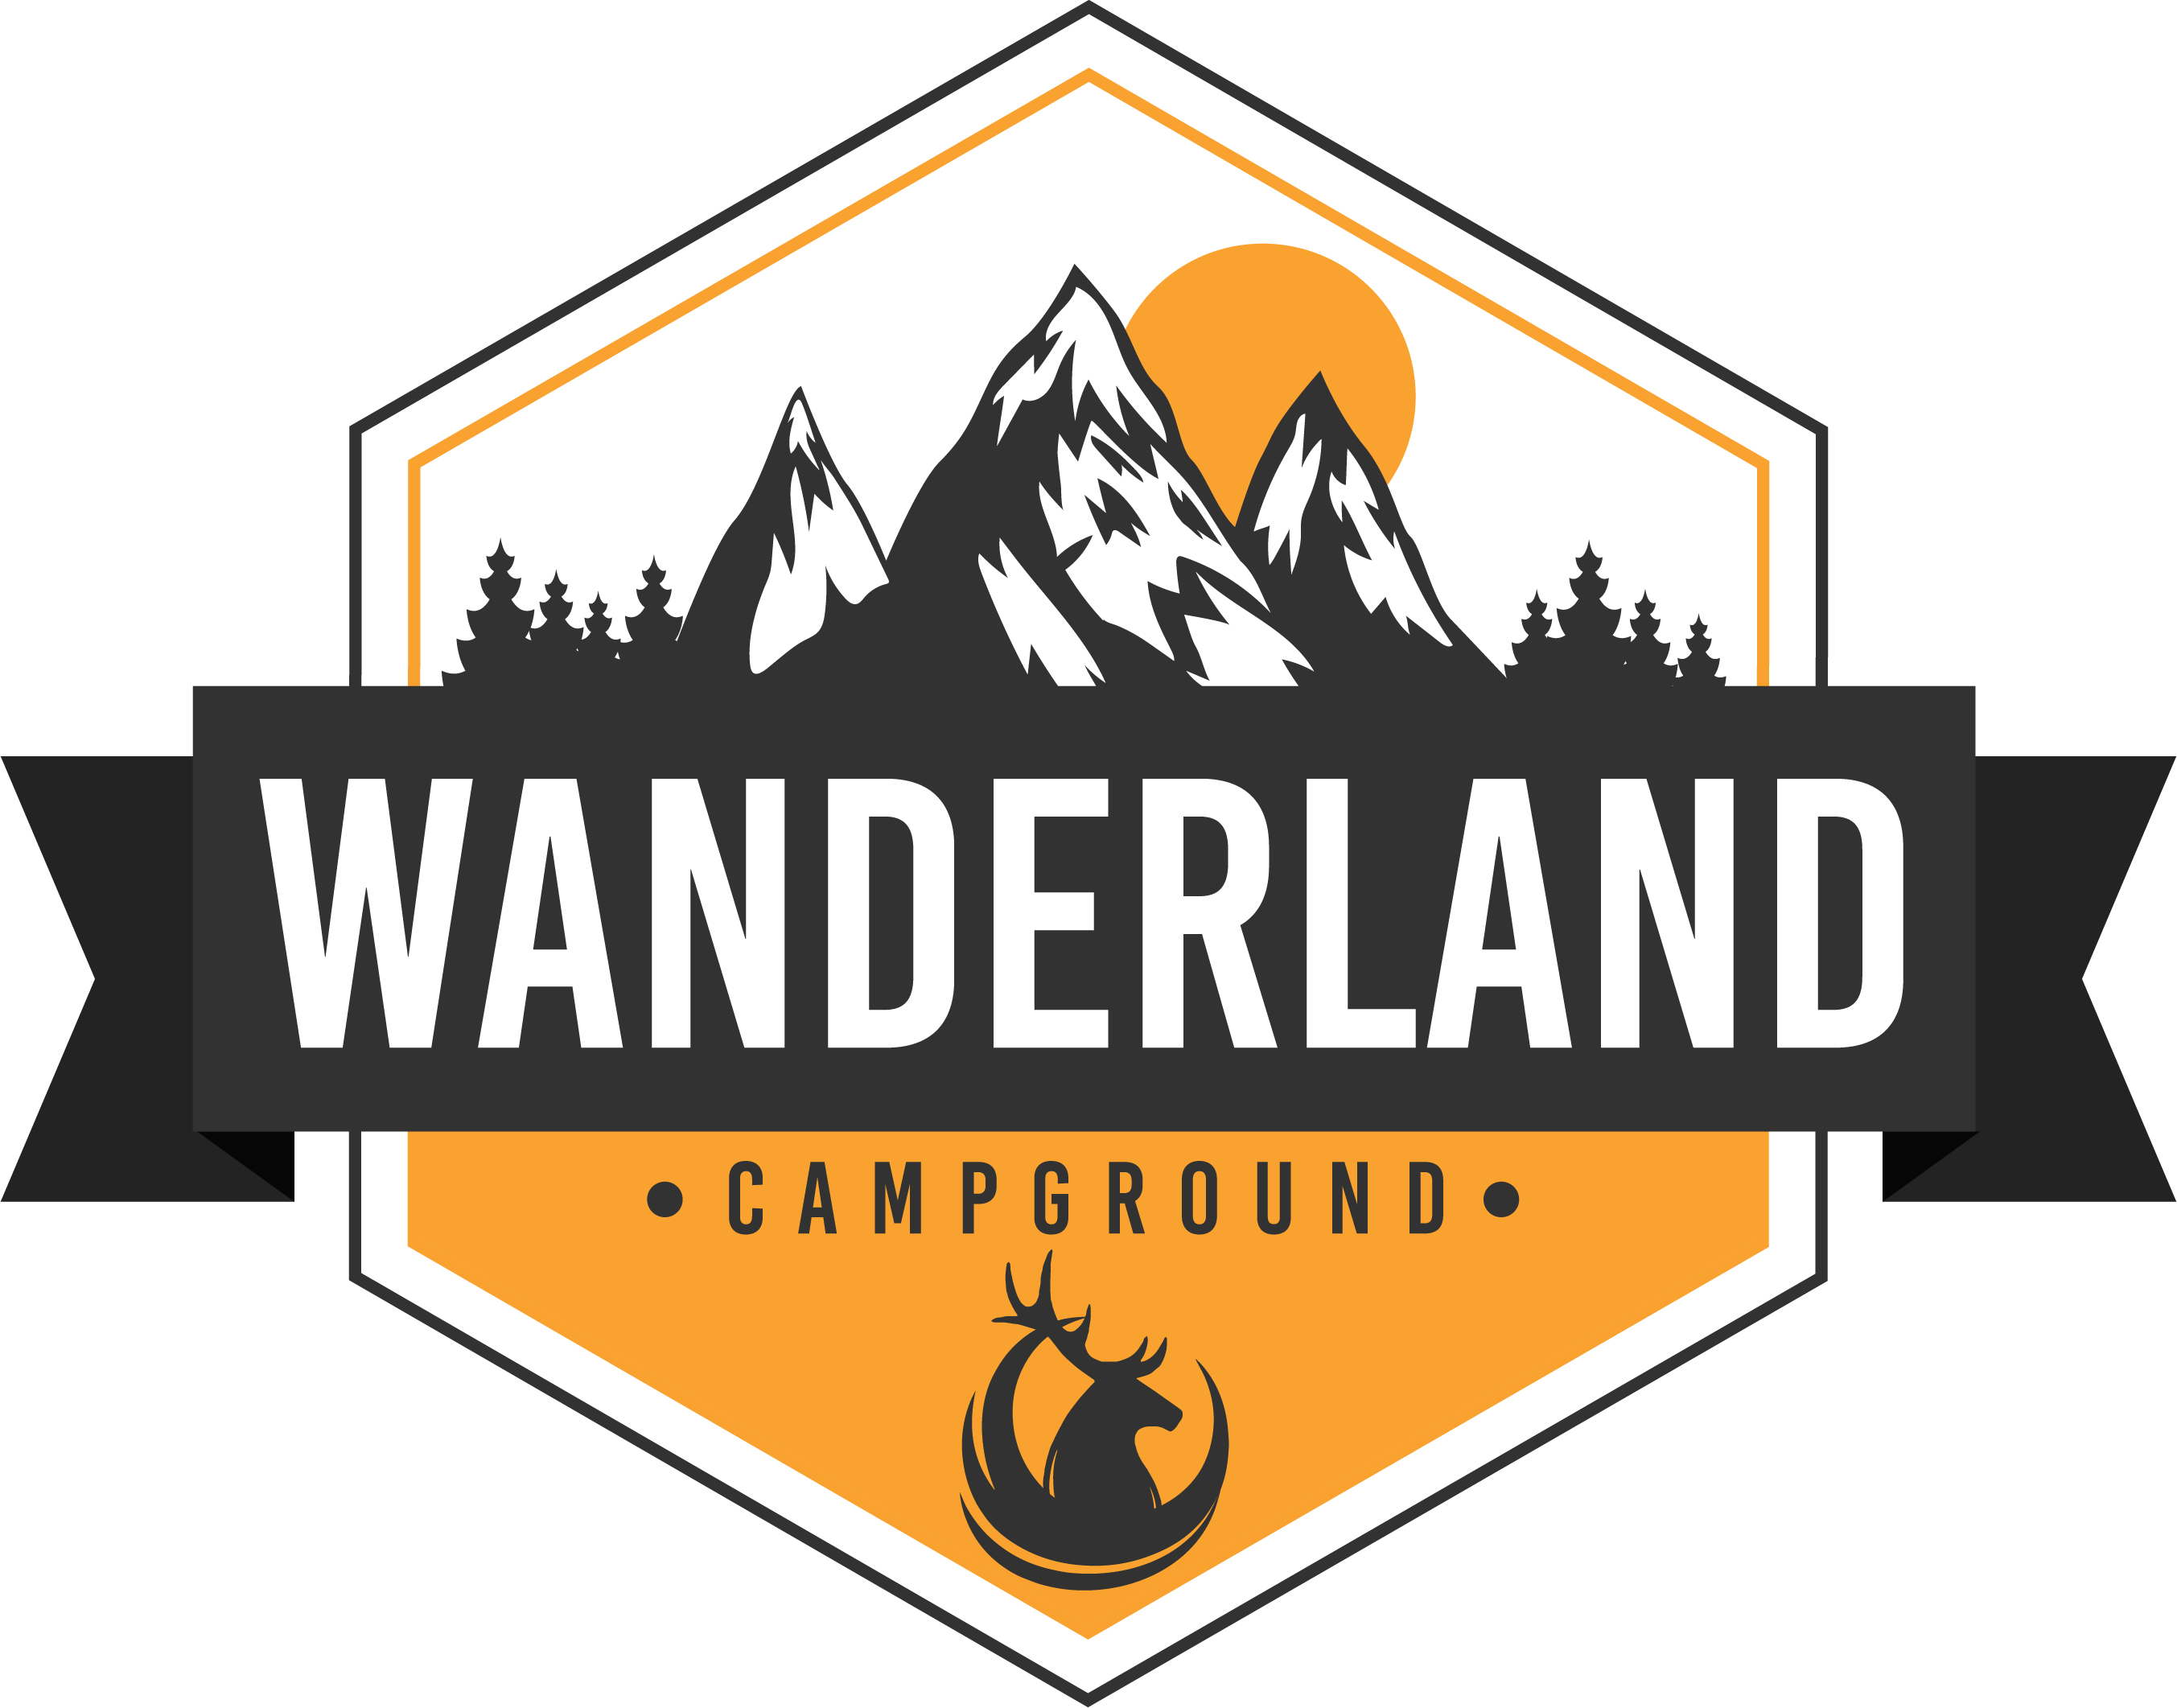 Wanderland Ushers In Modern Camping Experience, on Lookout Mountain, Georgia